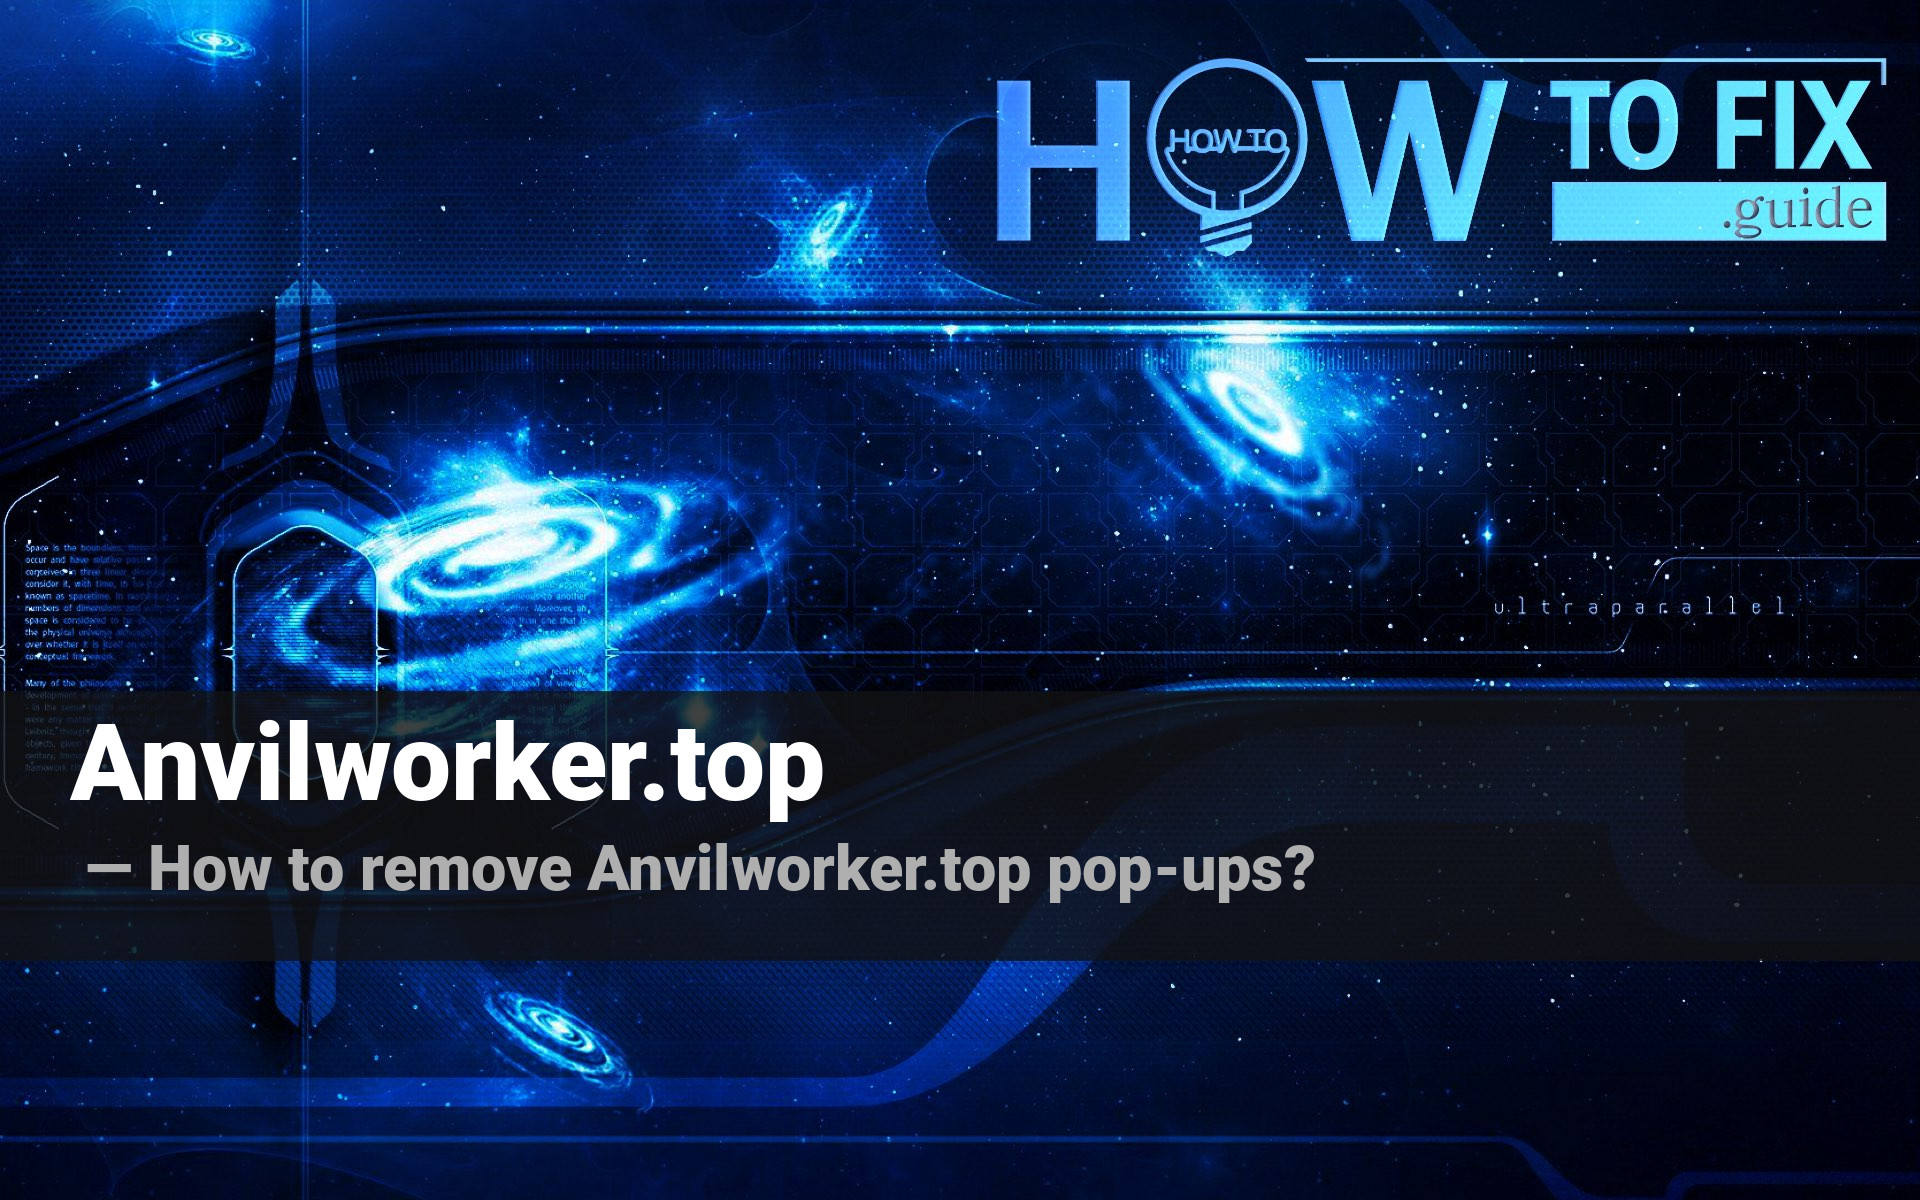 How to remove Anvilworker.top popups? — Fix Guide